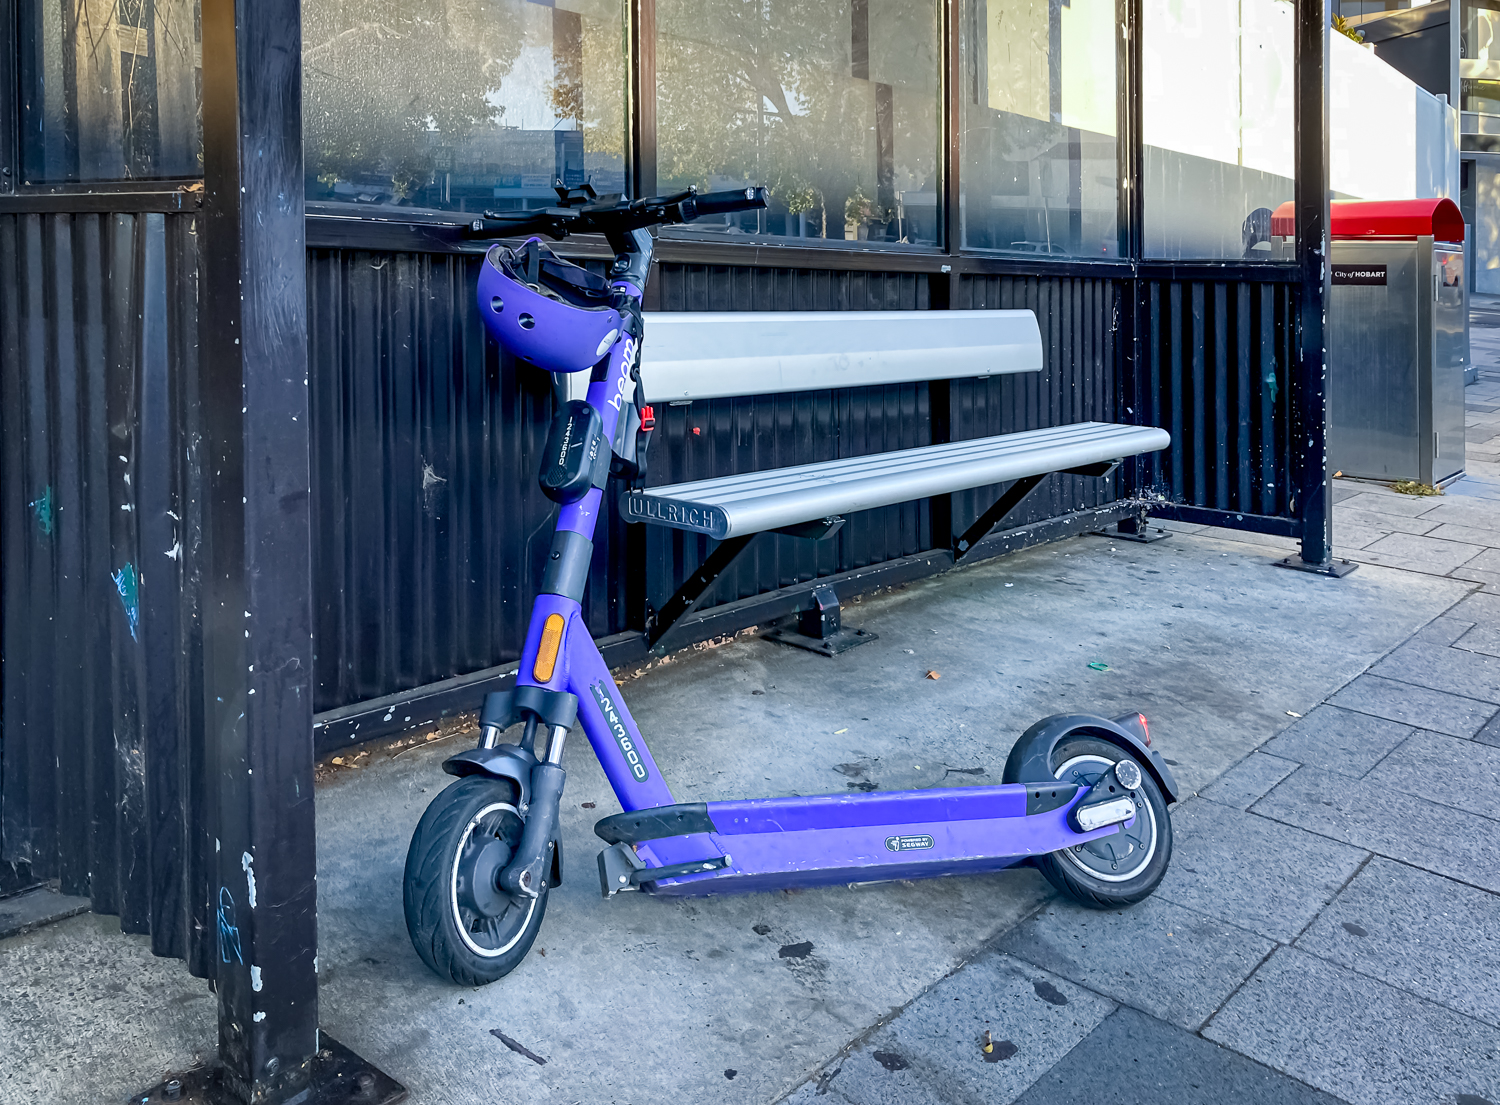 A purple e-scooter propped up against a seat under a bus shelter